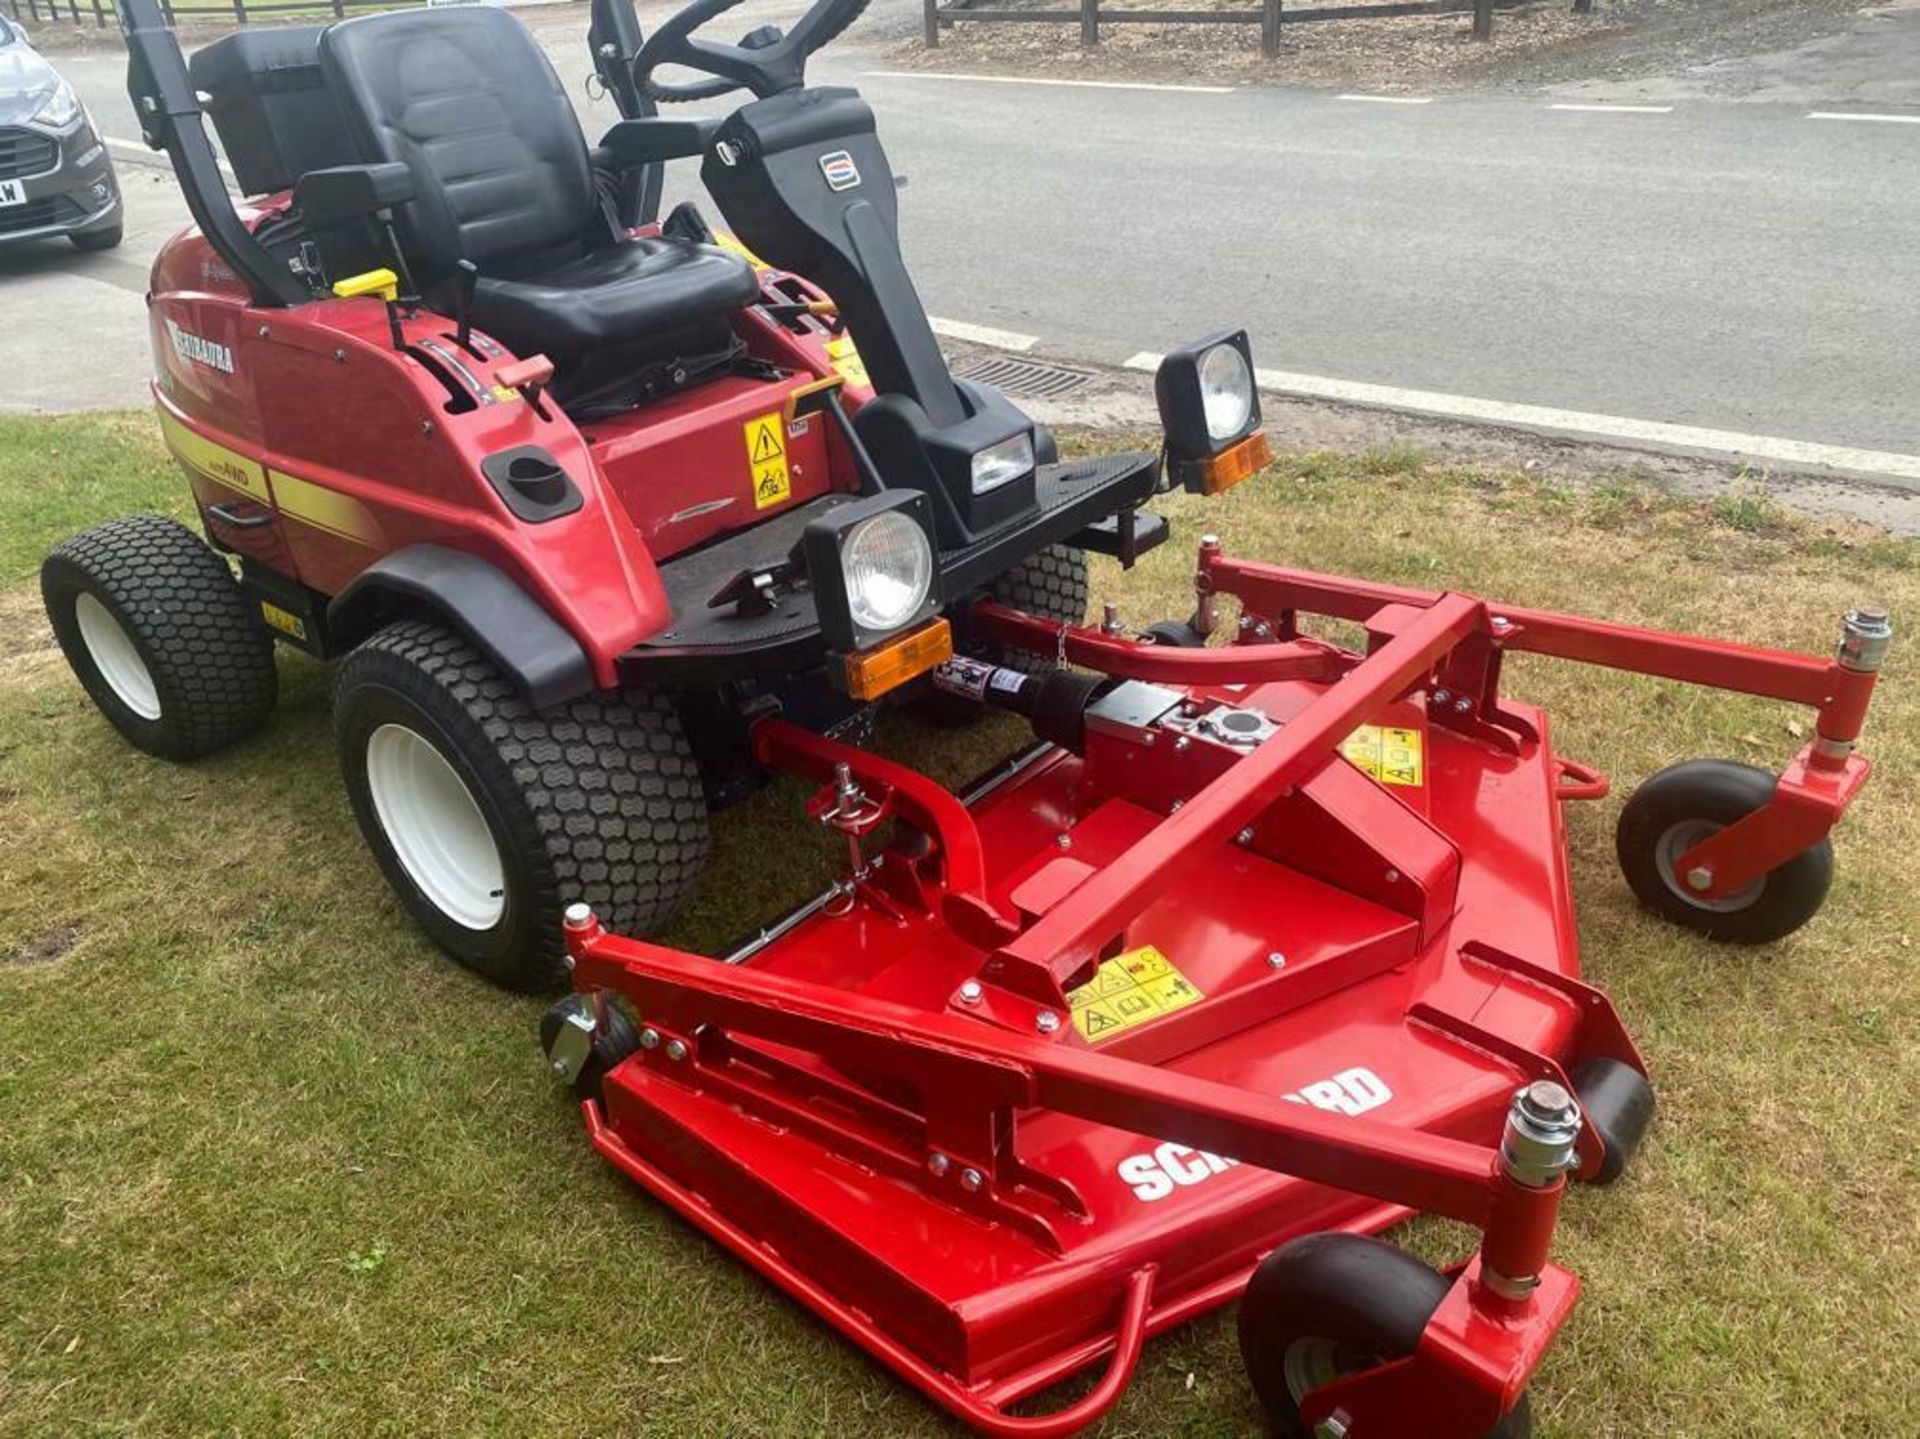 SHIBAURA CM374 UPFRONT ROTARY MOWER, 37HP, BRAND NEW 60" CUT DECK NEVER USED, DIESEL, YEAR 2014 - Image 3 of 5